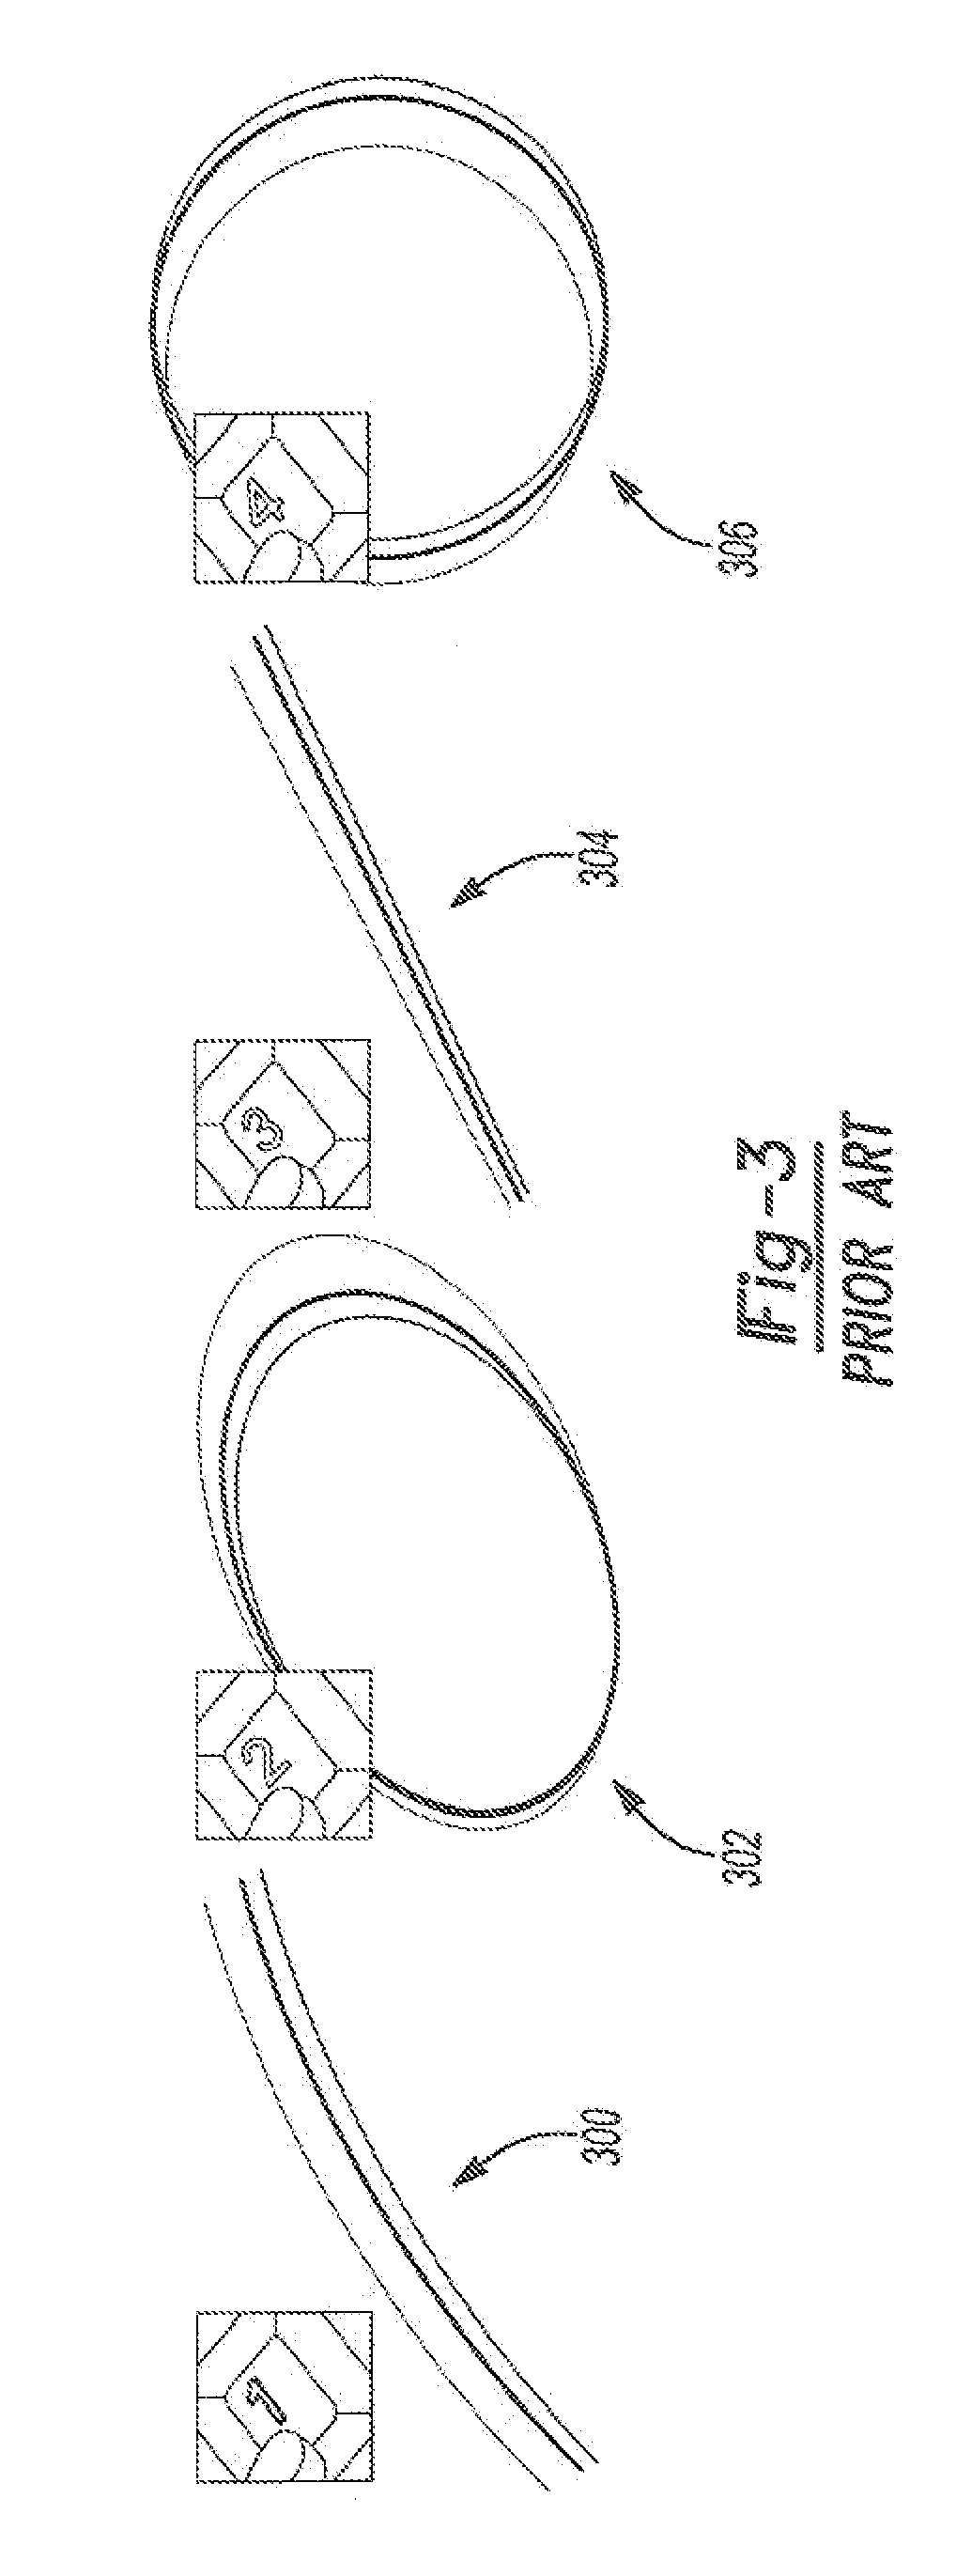 Pen-based 3D drawing system with 3D mirror symmetric curve drawing